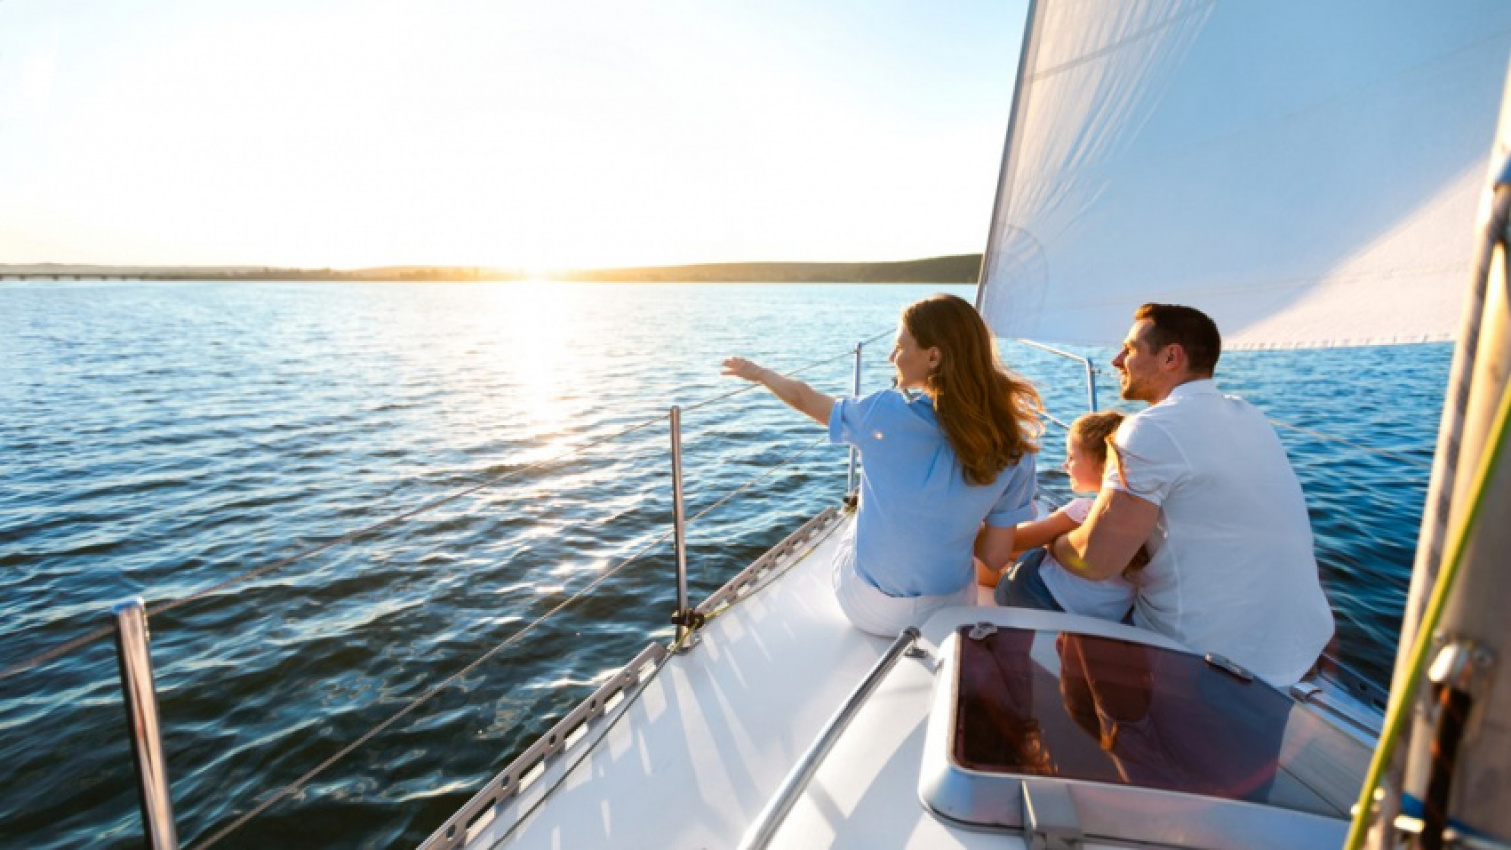 activities & things to do, autos, reviews, boat, boating, buy a boat, finance, finding the perfect vessel for your first-time family sailing trip